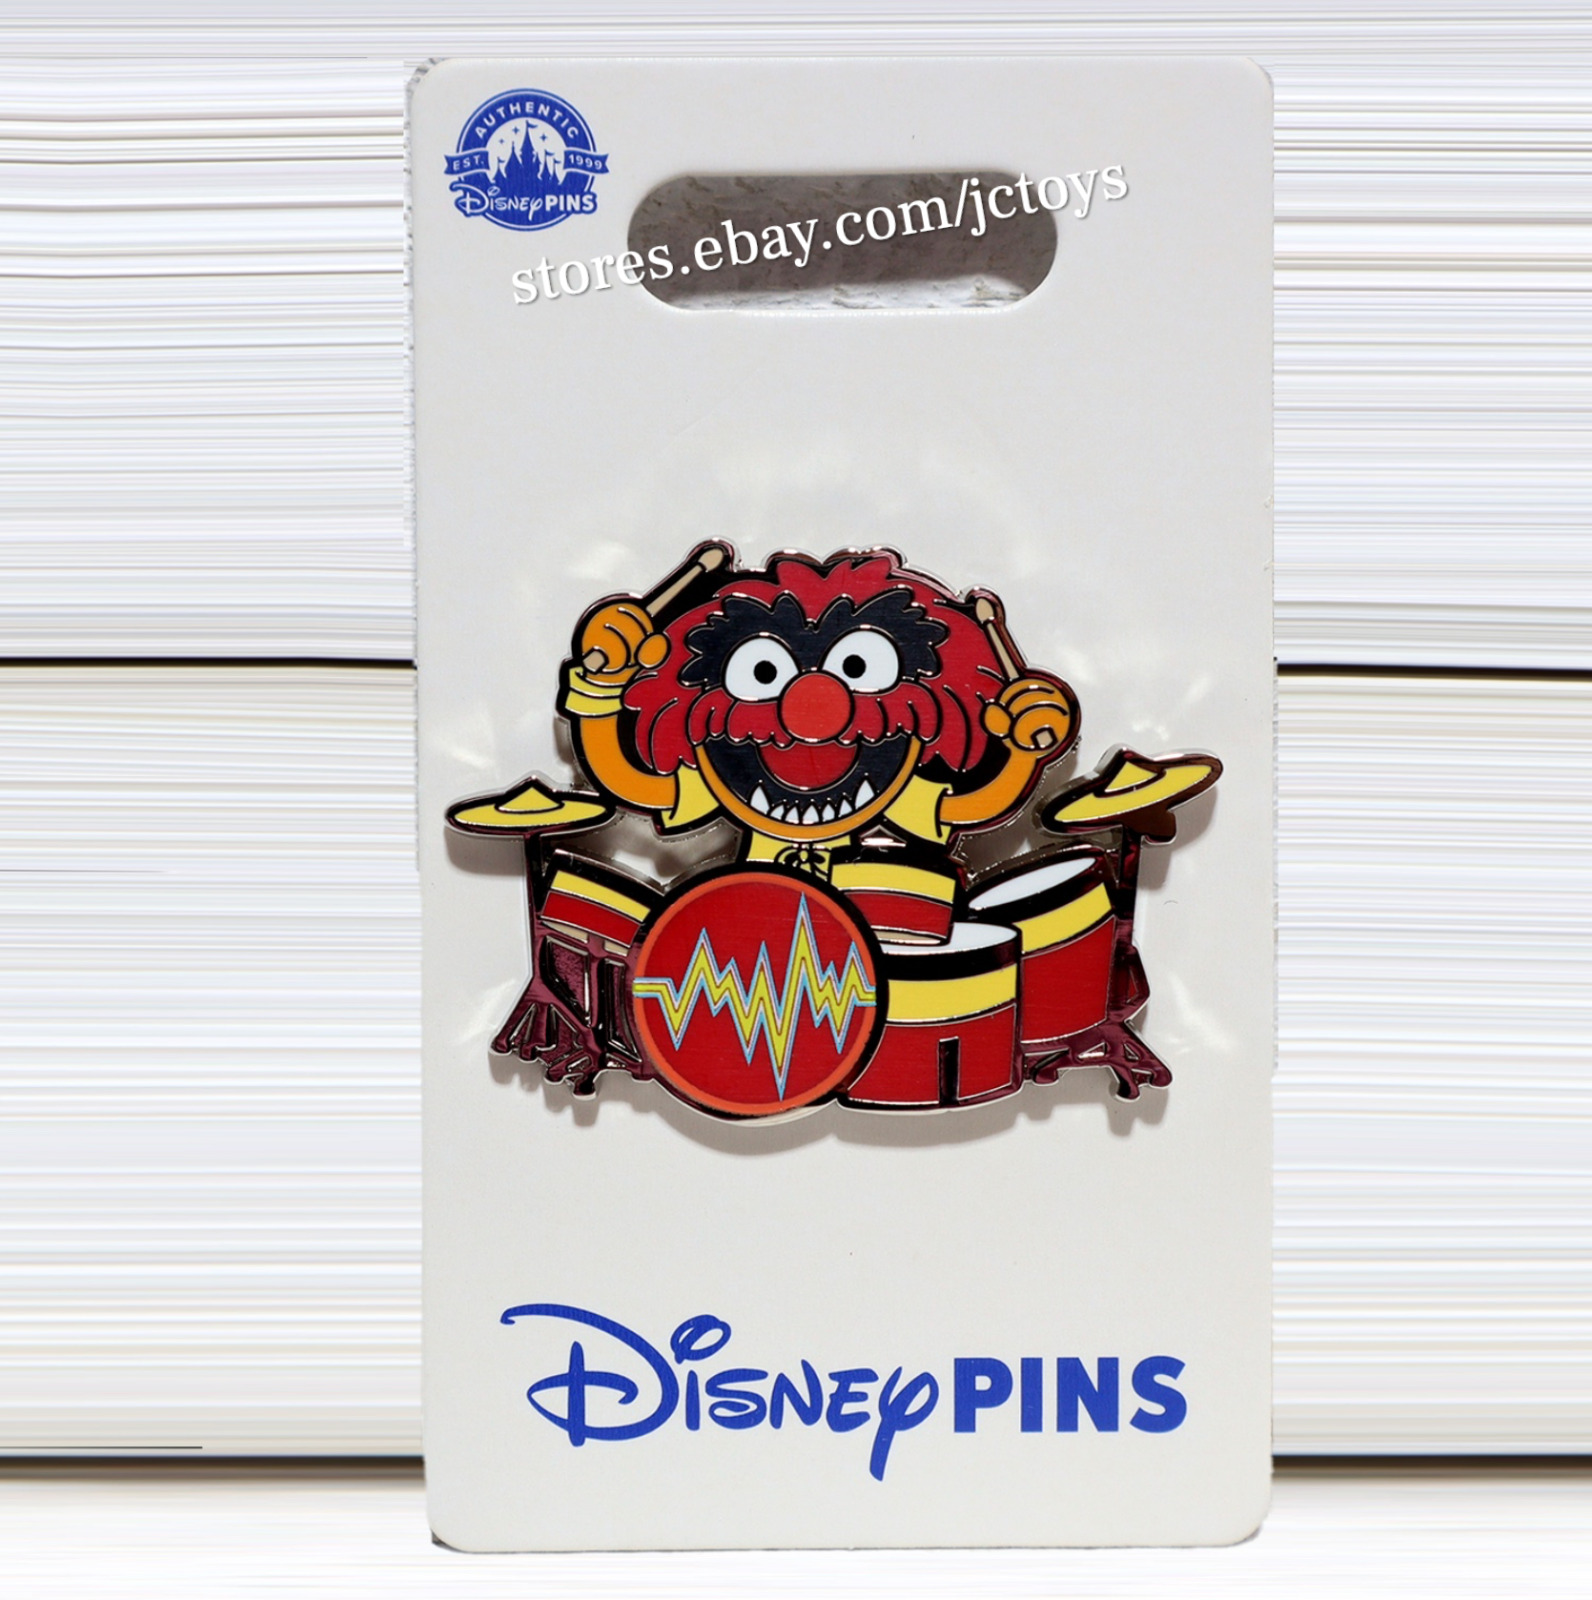 Disney Parks - The Muppets - Animal On Drum Set - Pin